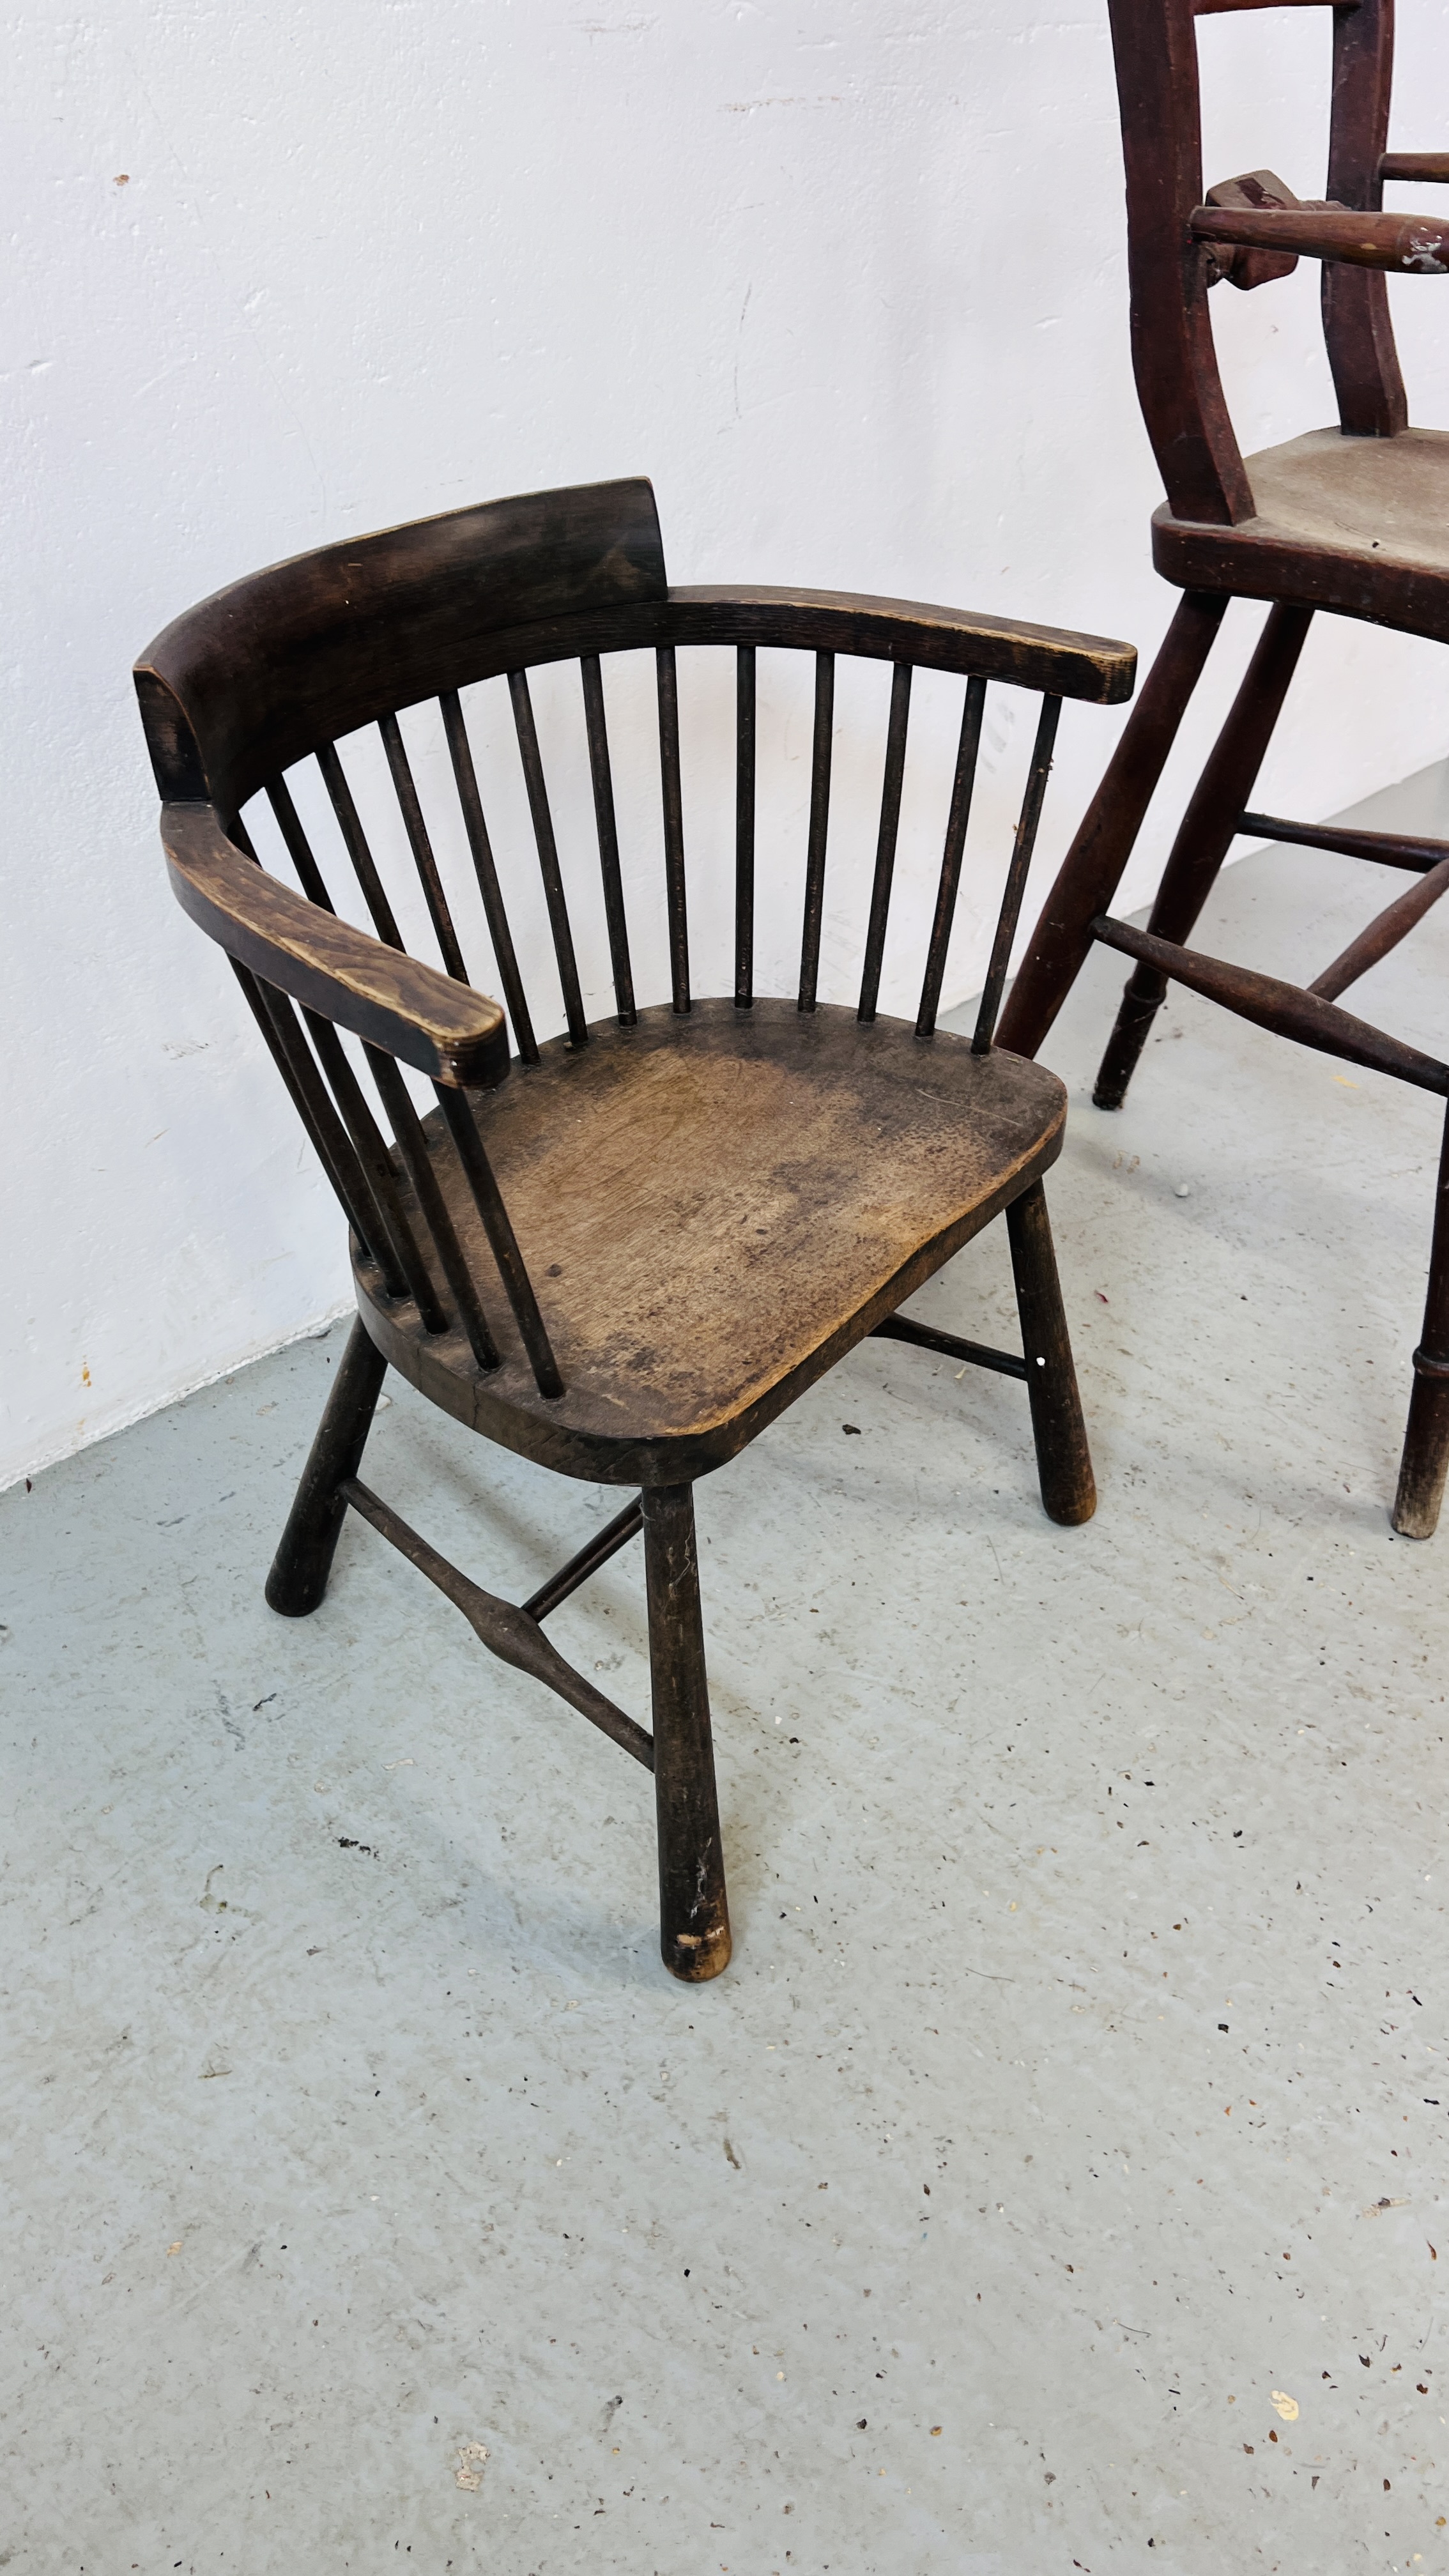 VINTAGE VICTORIAN HARDWOOD HIGHCHAIR ALONG WITH A LIBERTY STYLE CHILD'S CHAIR. - Image 5 of 8